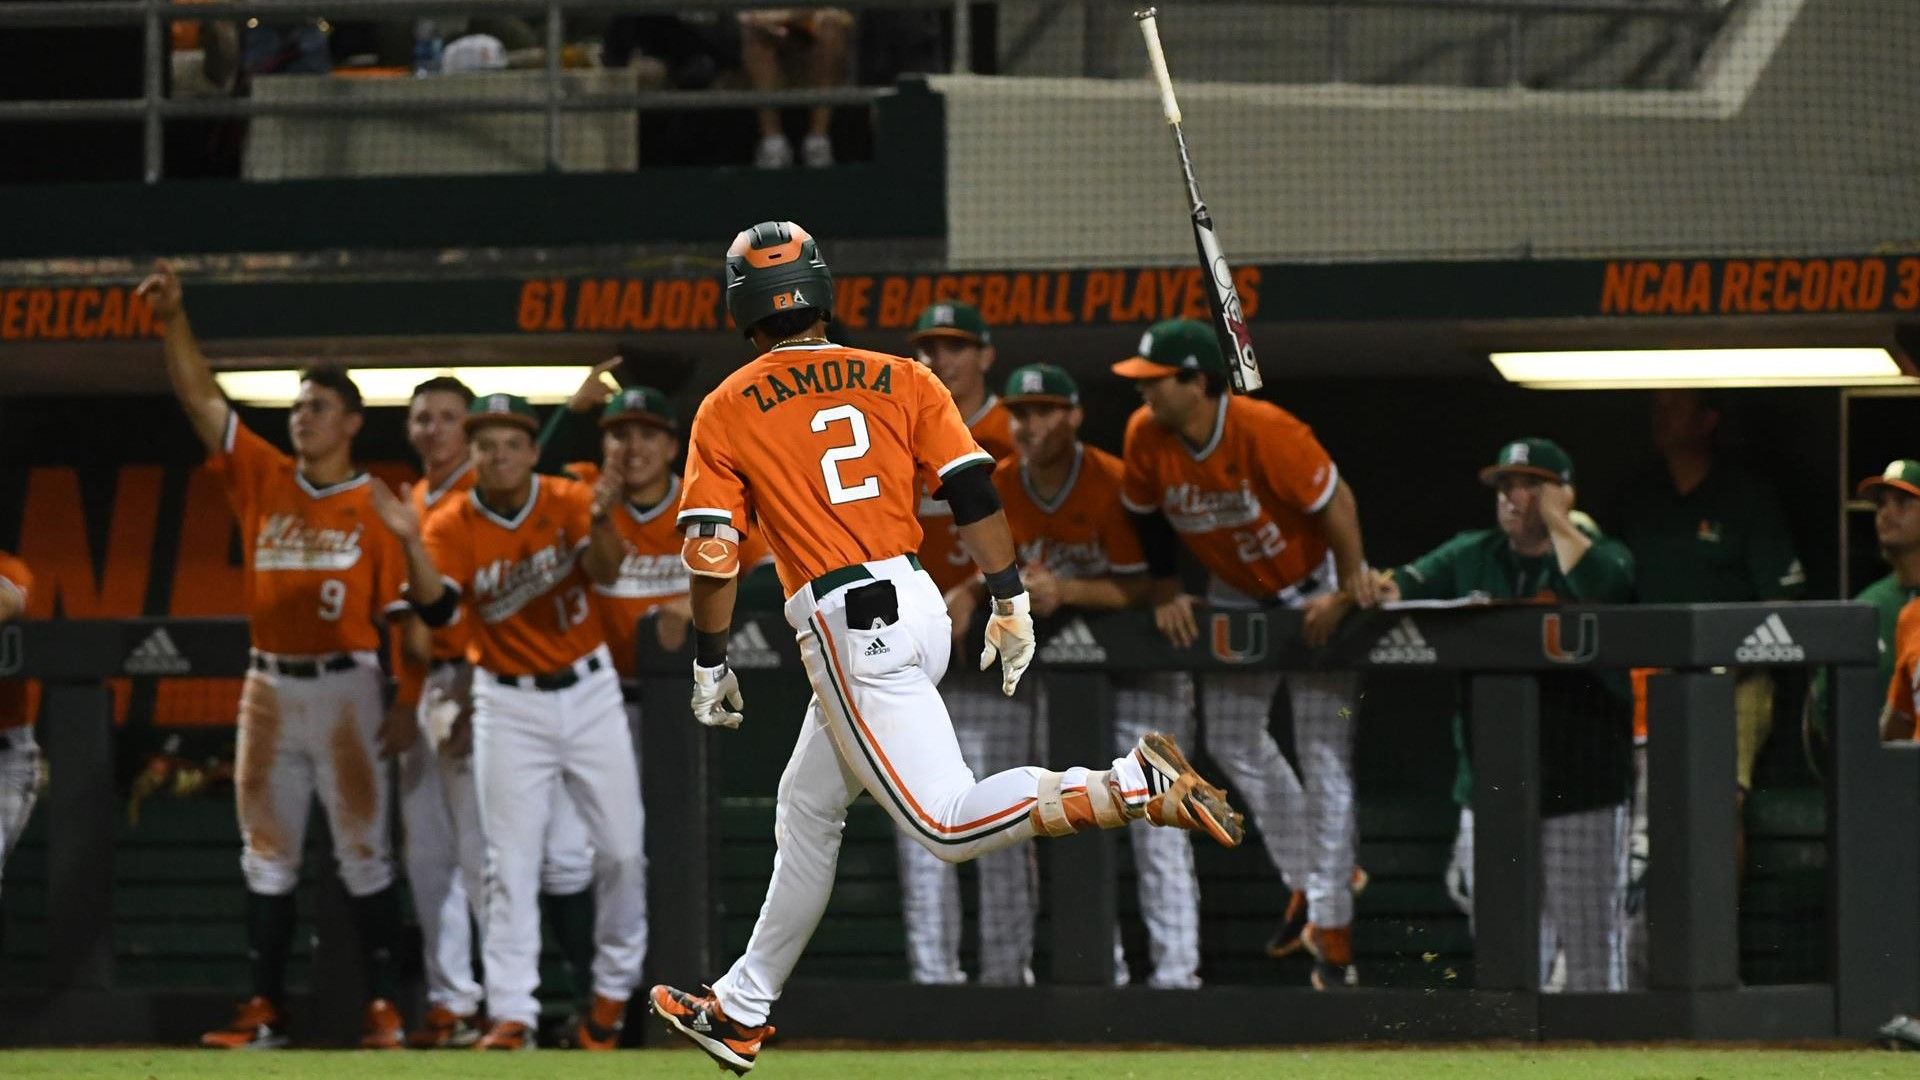 DiMare Leads Canes to Historic Win over Rutgers, 19-3